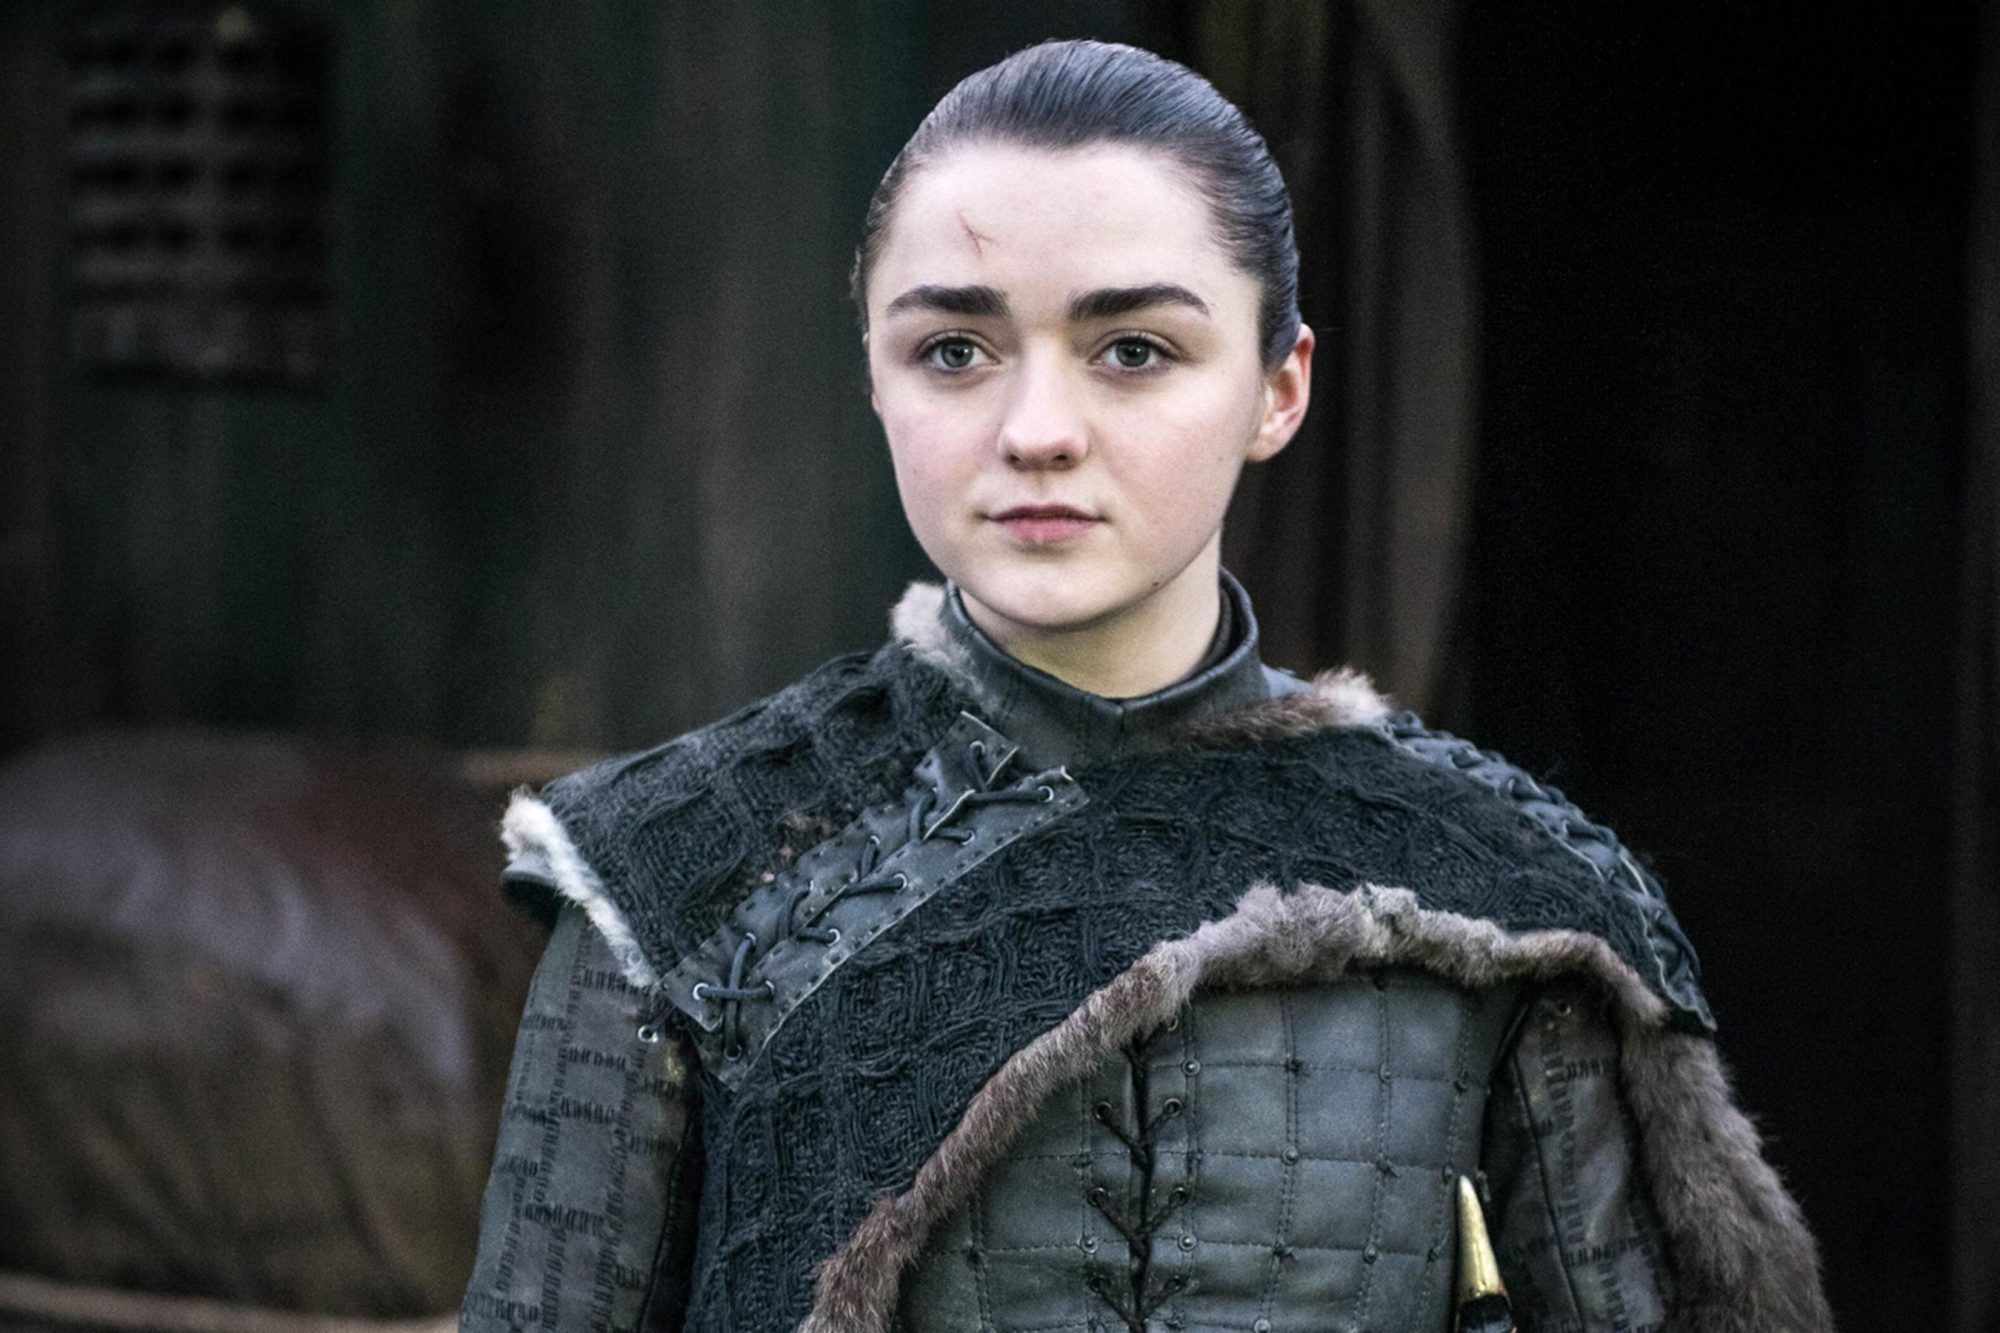 Maisie Williams reveals a Game of Thrones final season storyline ...